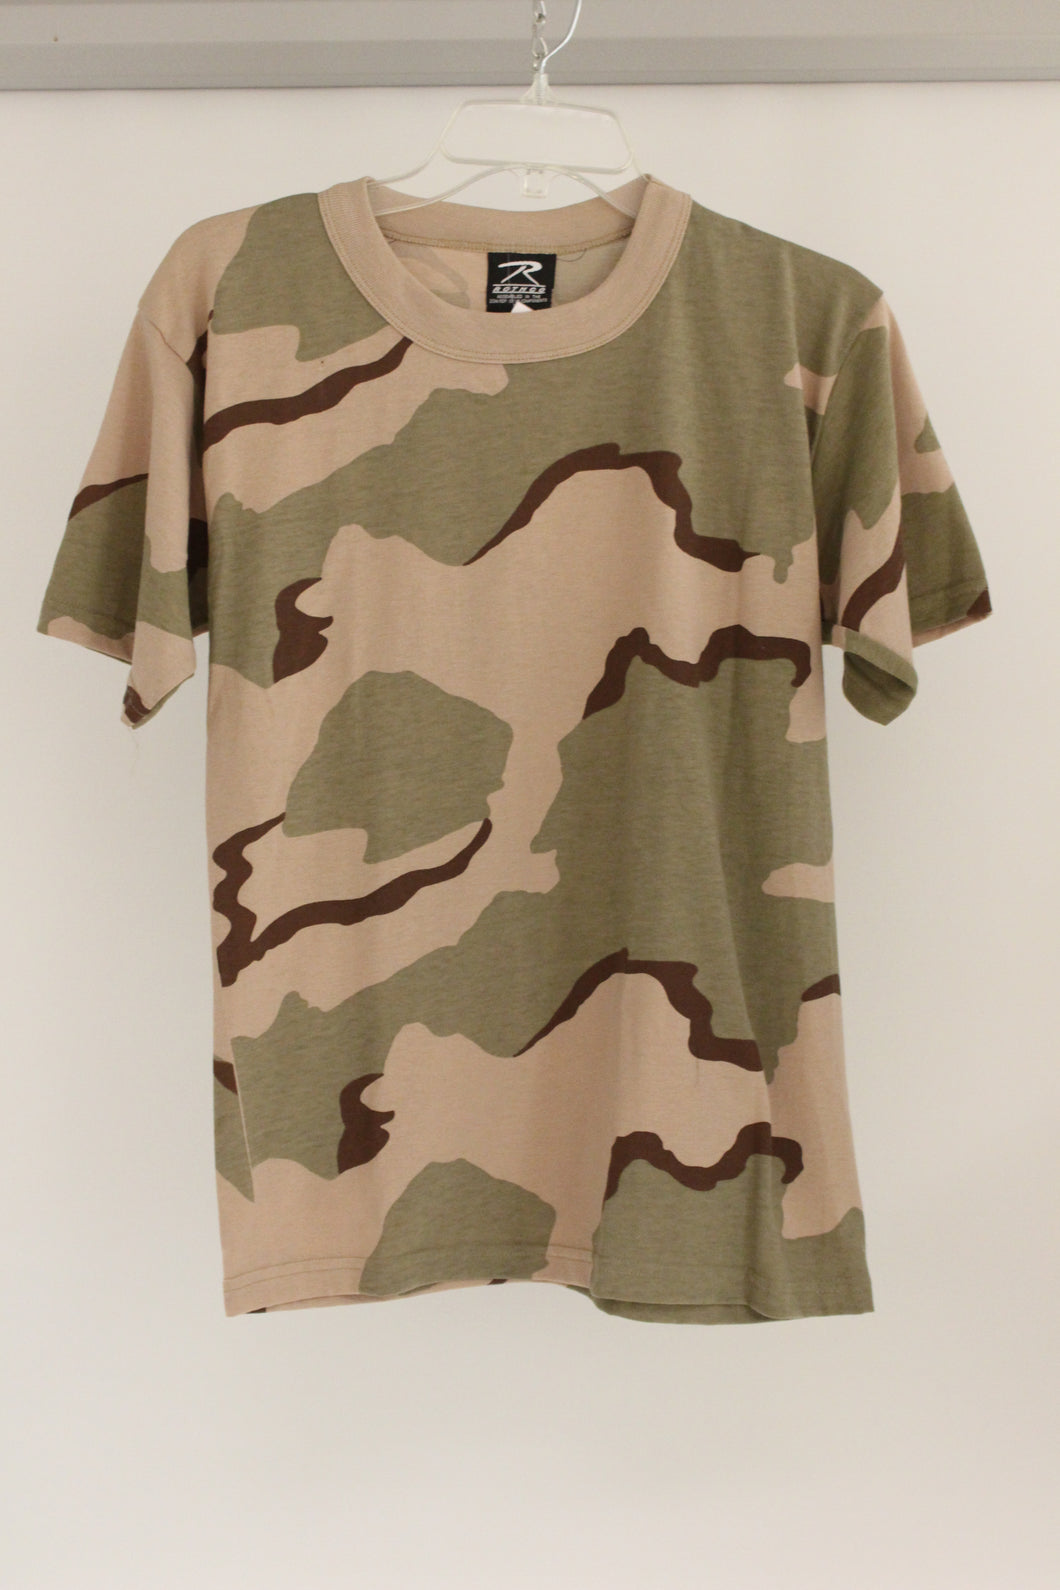 Rothco Childrens Kids Camo Short Sleeve T-Shirt - Size: X Large - Used